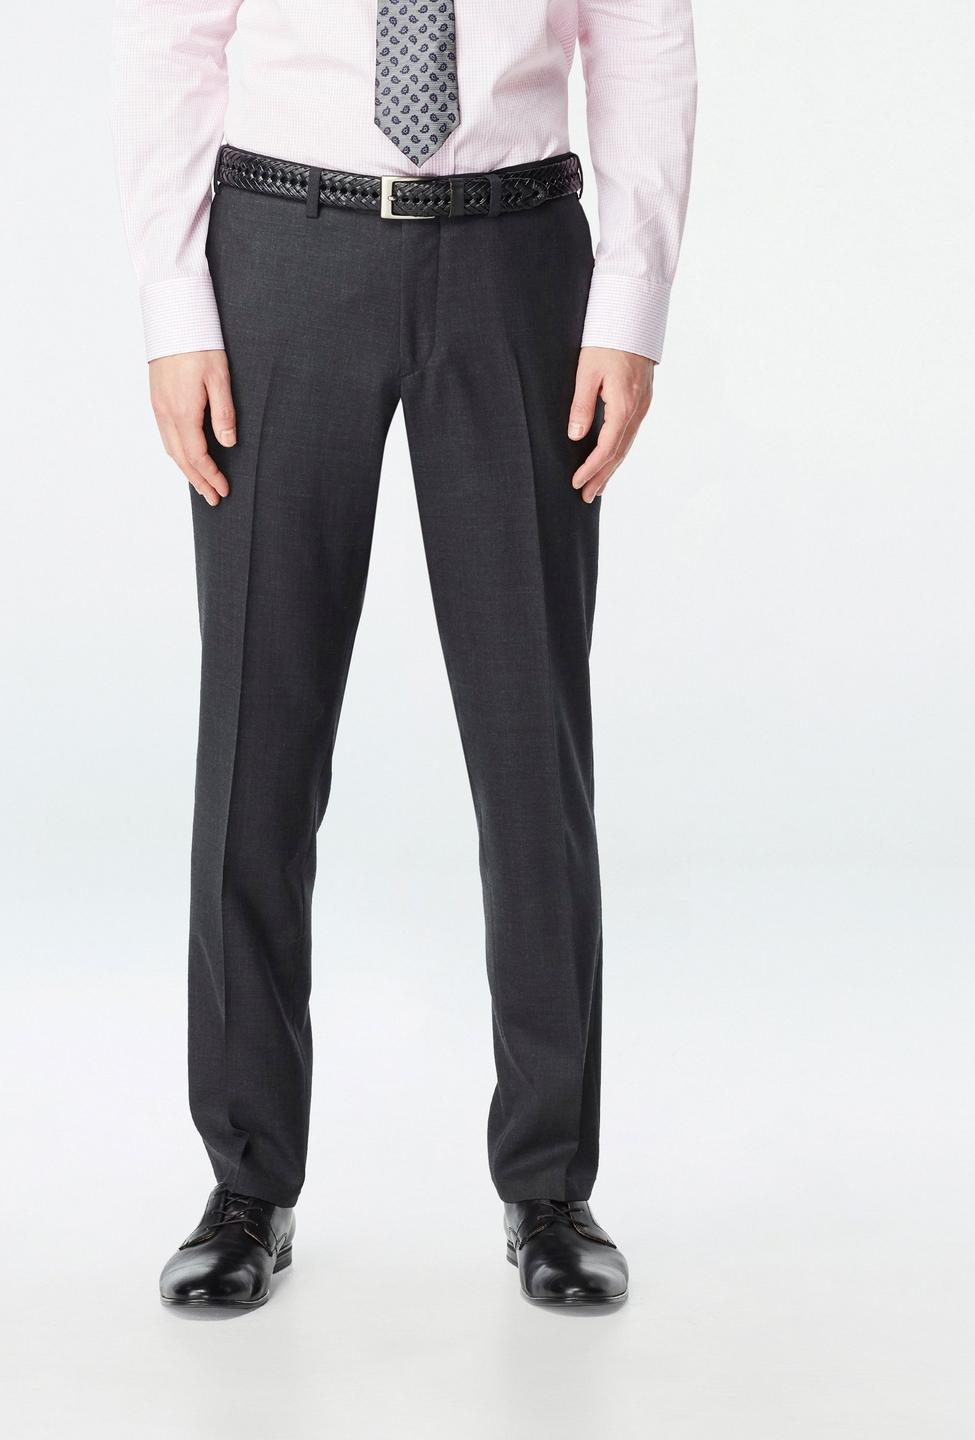 Gray pants - Hayle Solid Design from Premium Indochino Collection